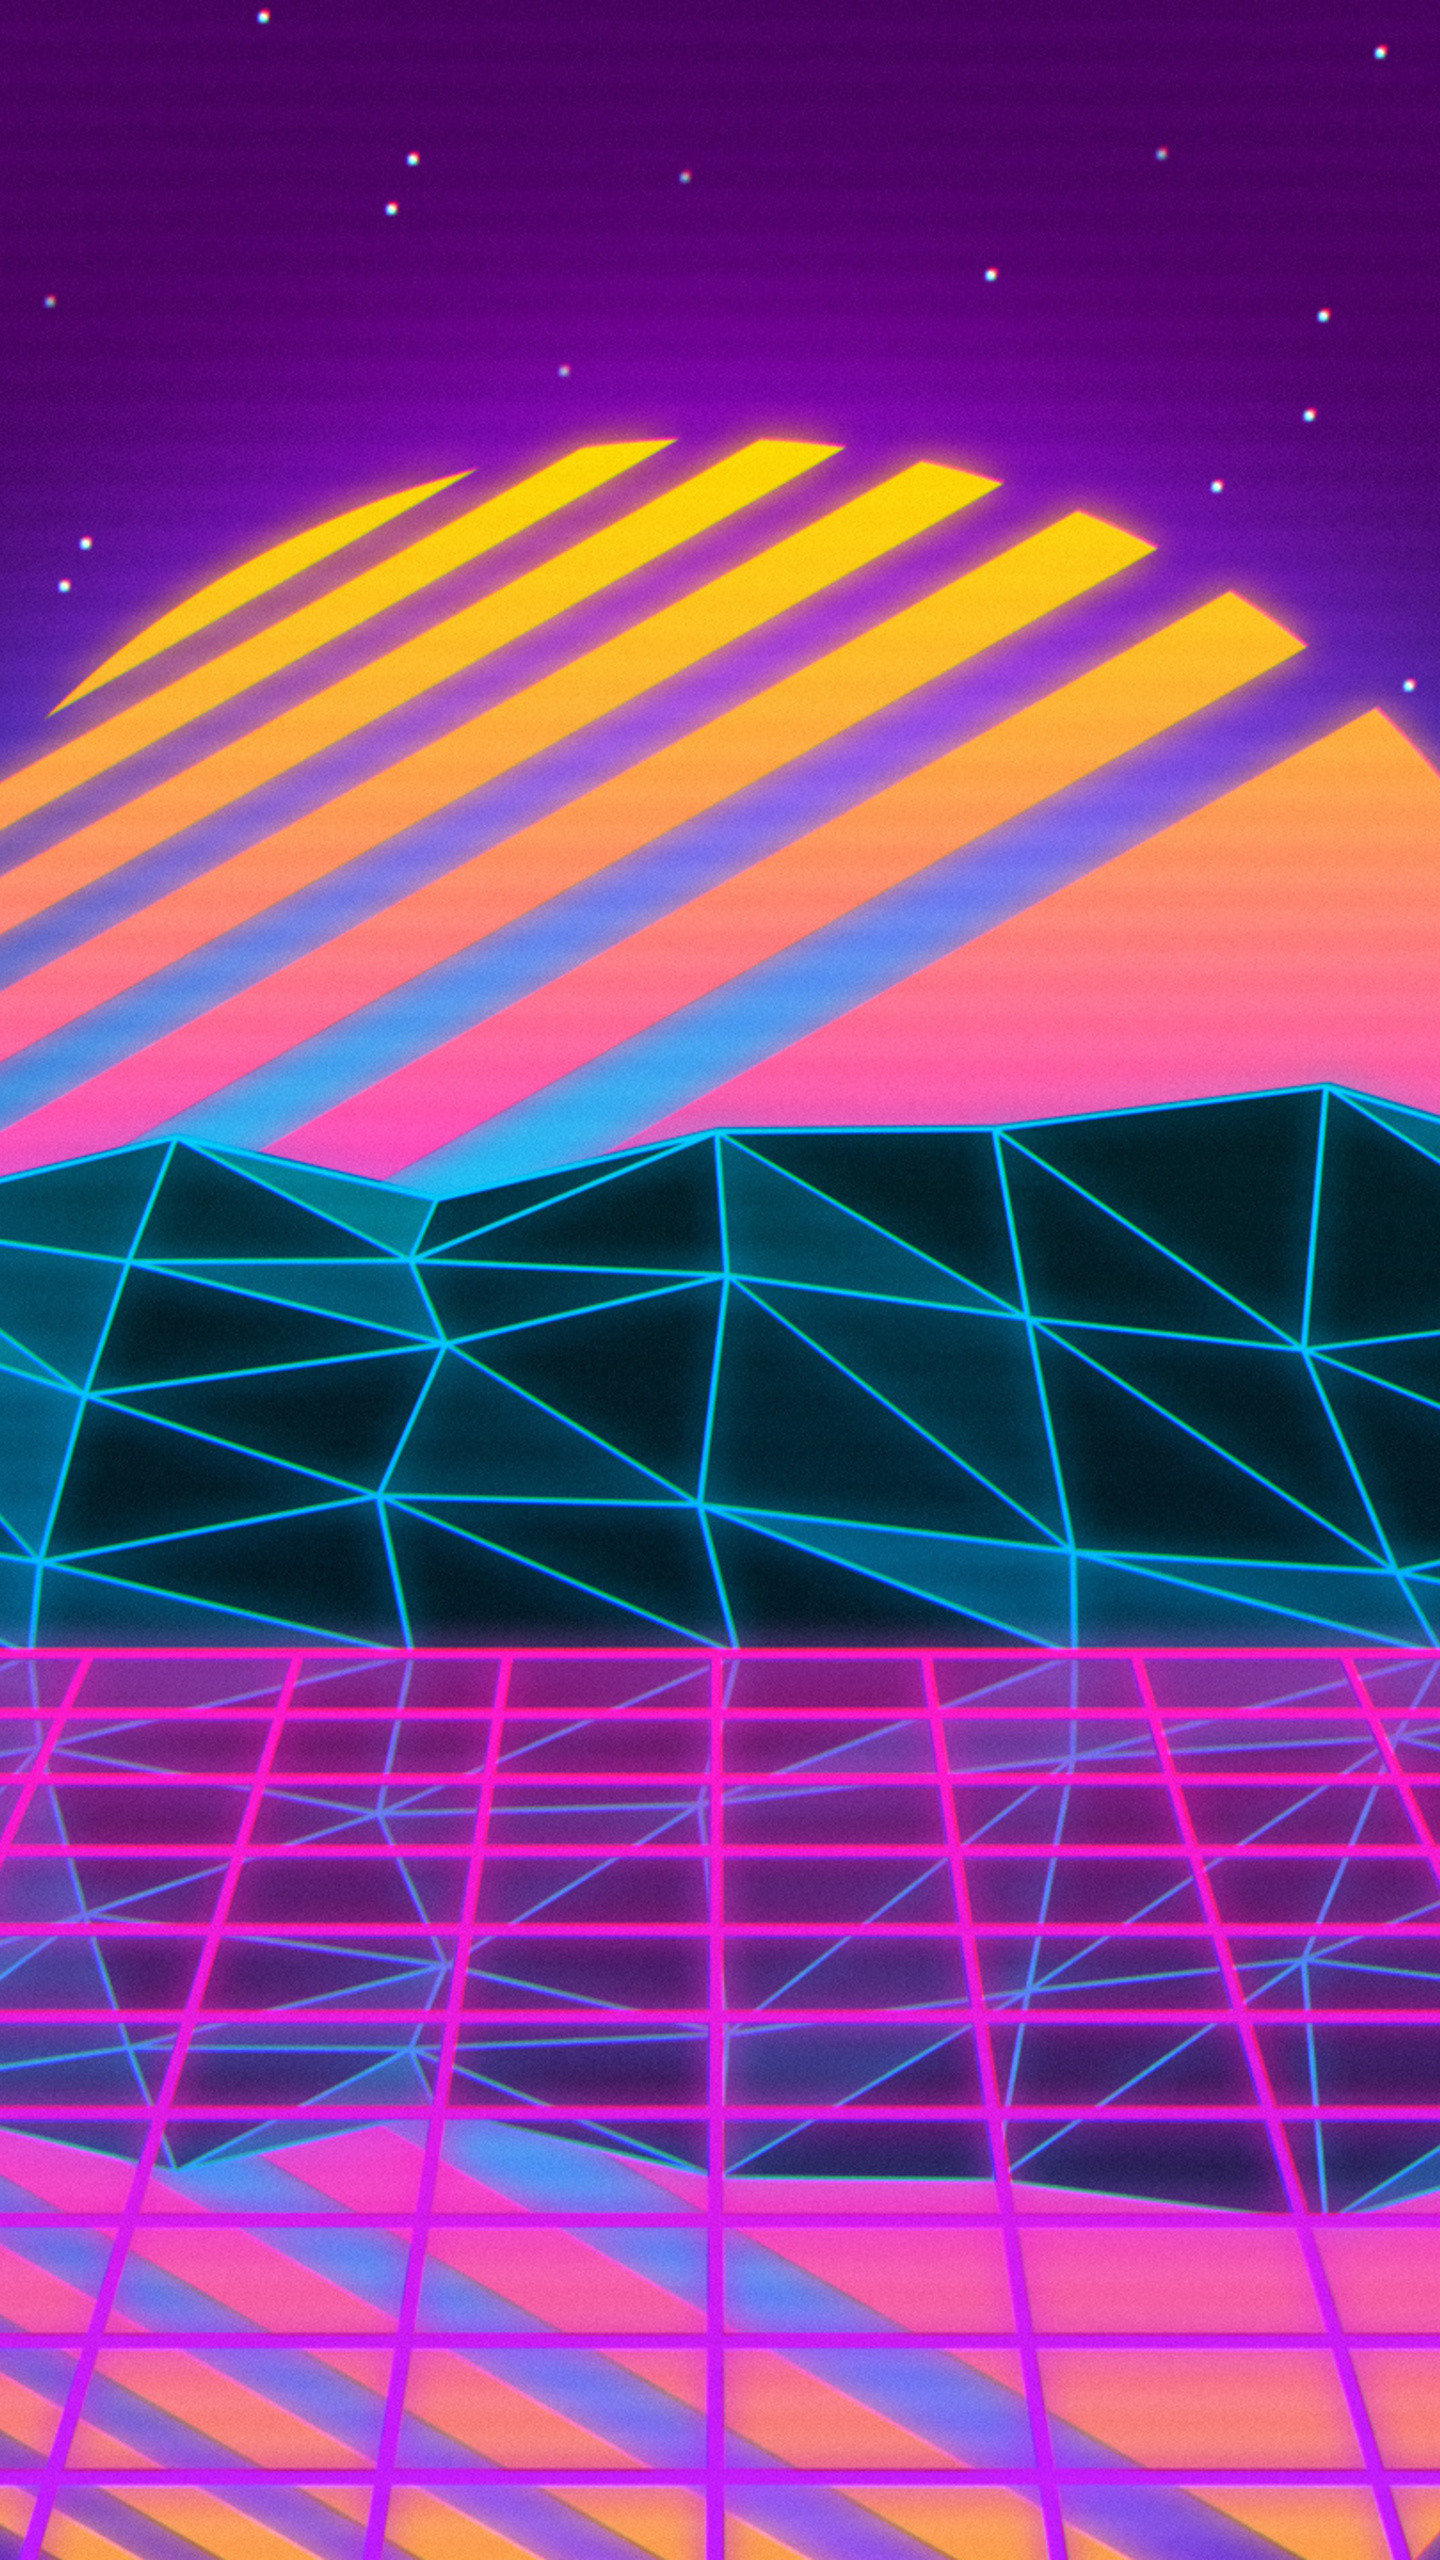 A retro style image of the sunset - Vaporwave